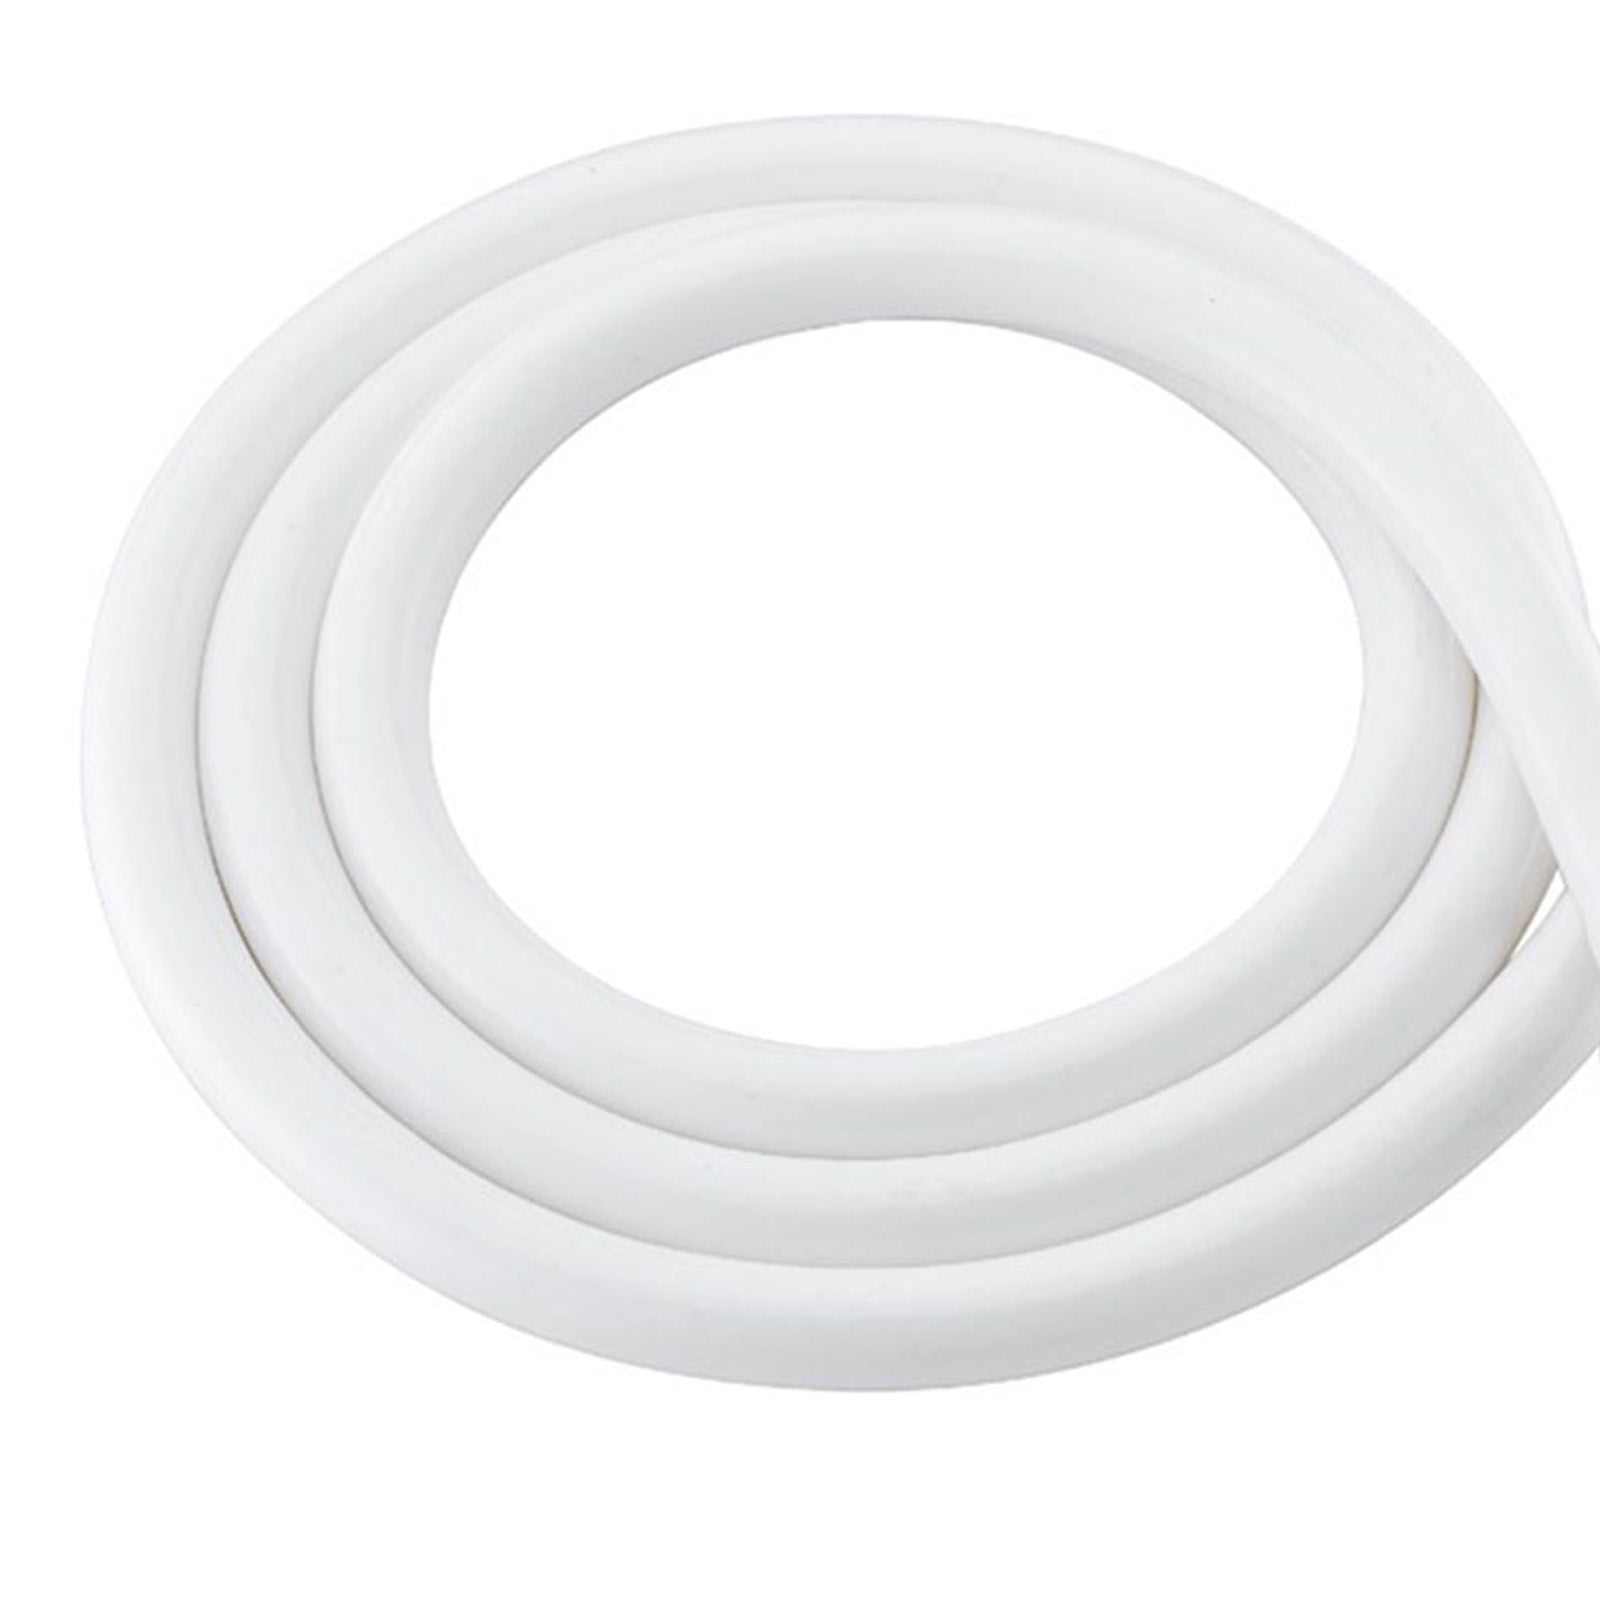 1.5m Smooth White PVC Flexible Shower Hose Replacement With Brass Connectors